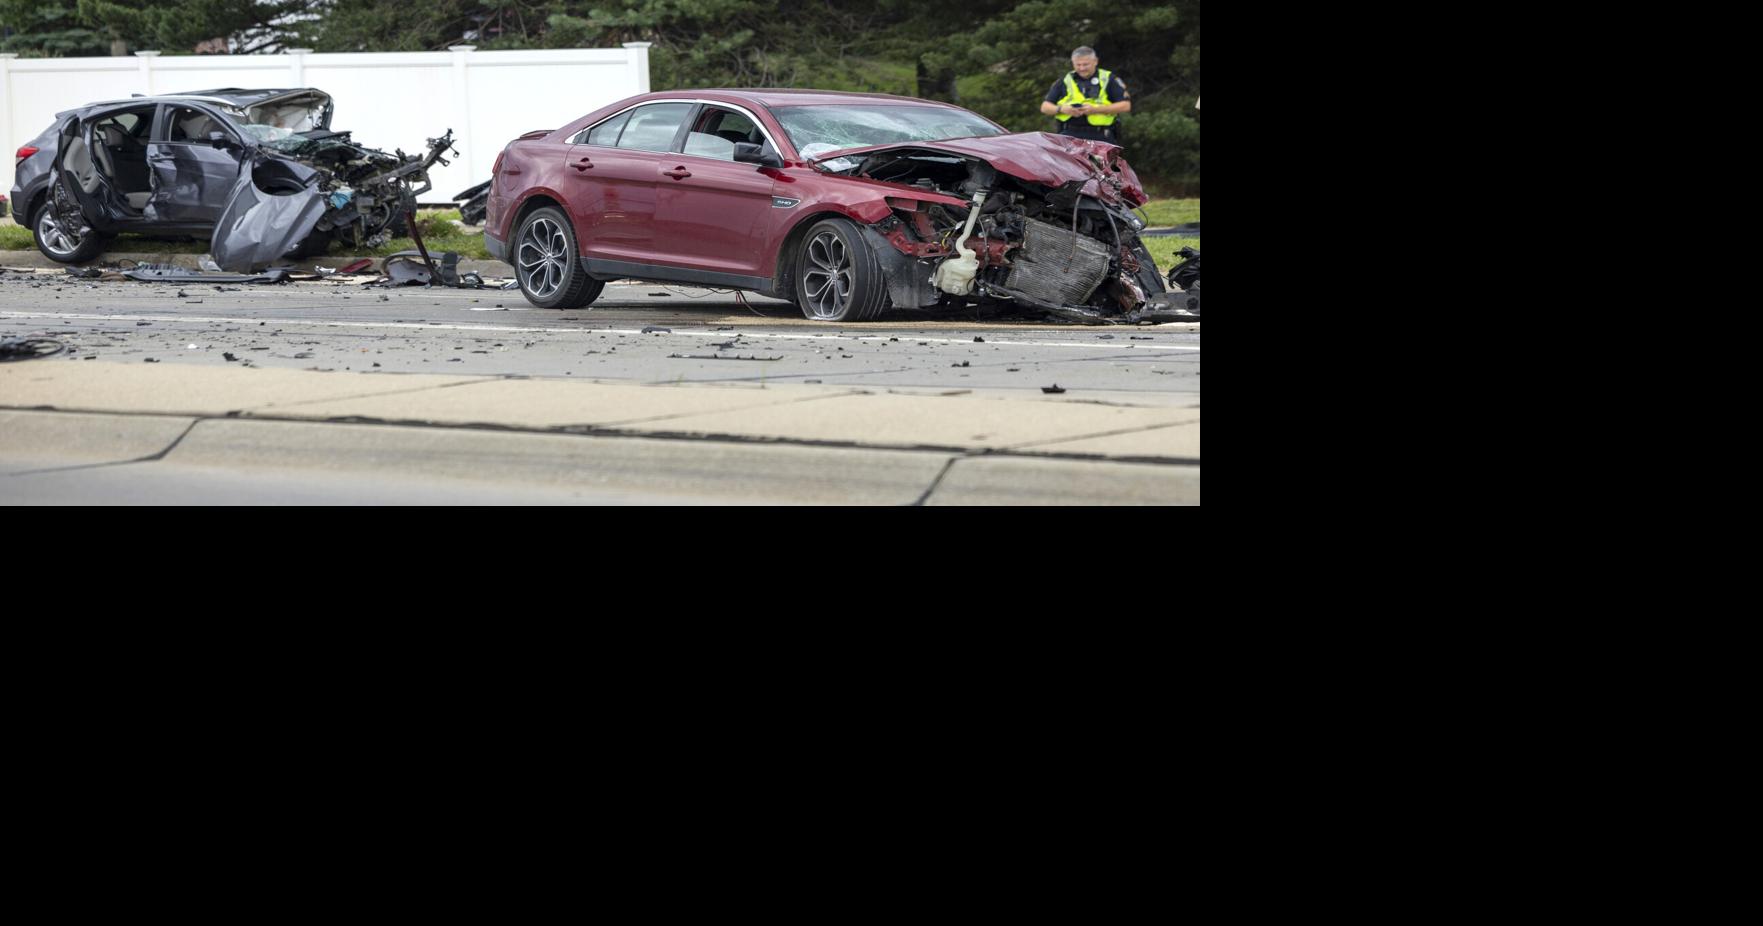 Traffic accident on South 84th Street in Lincoln kills one – Lincoln Journal Star